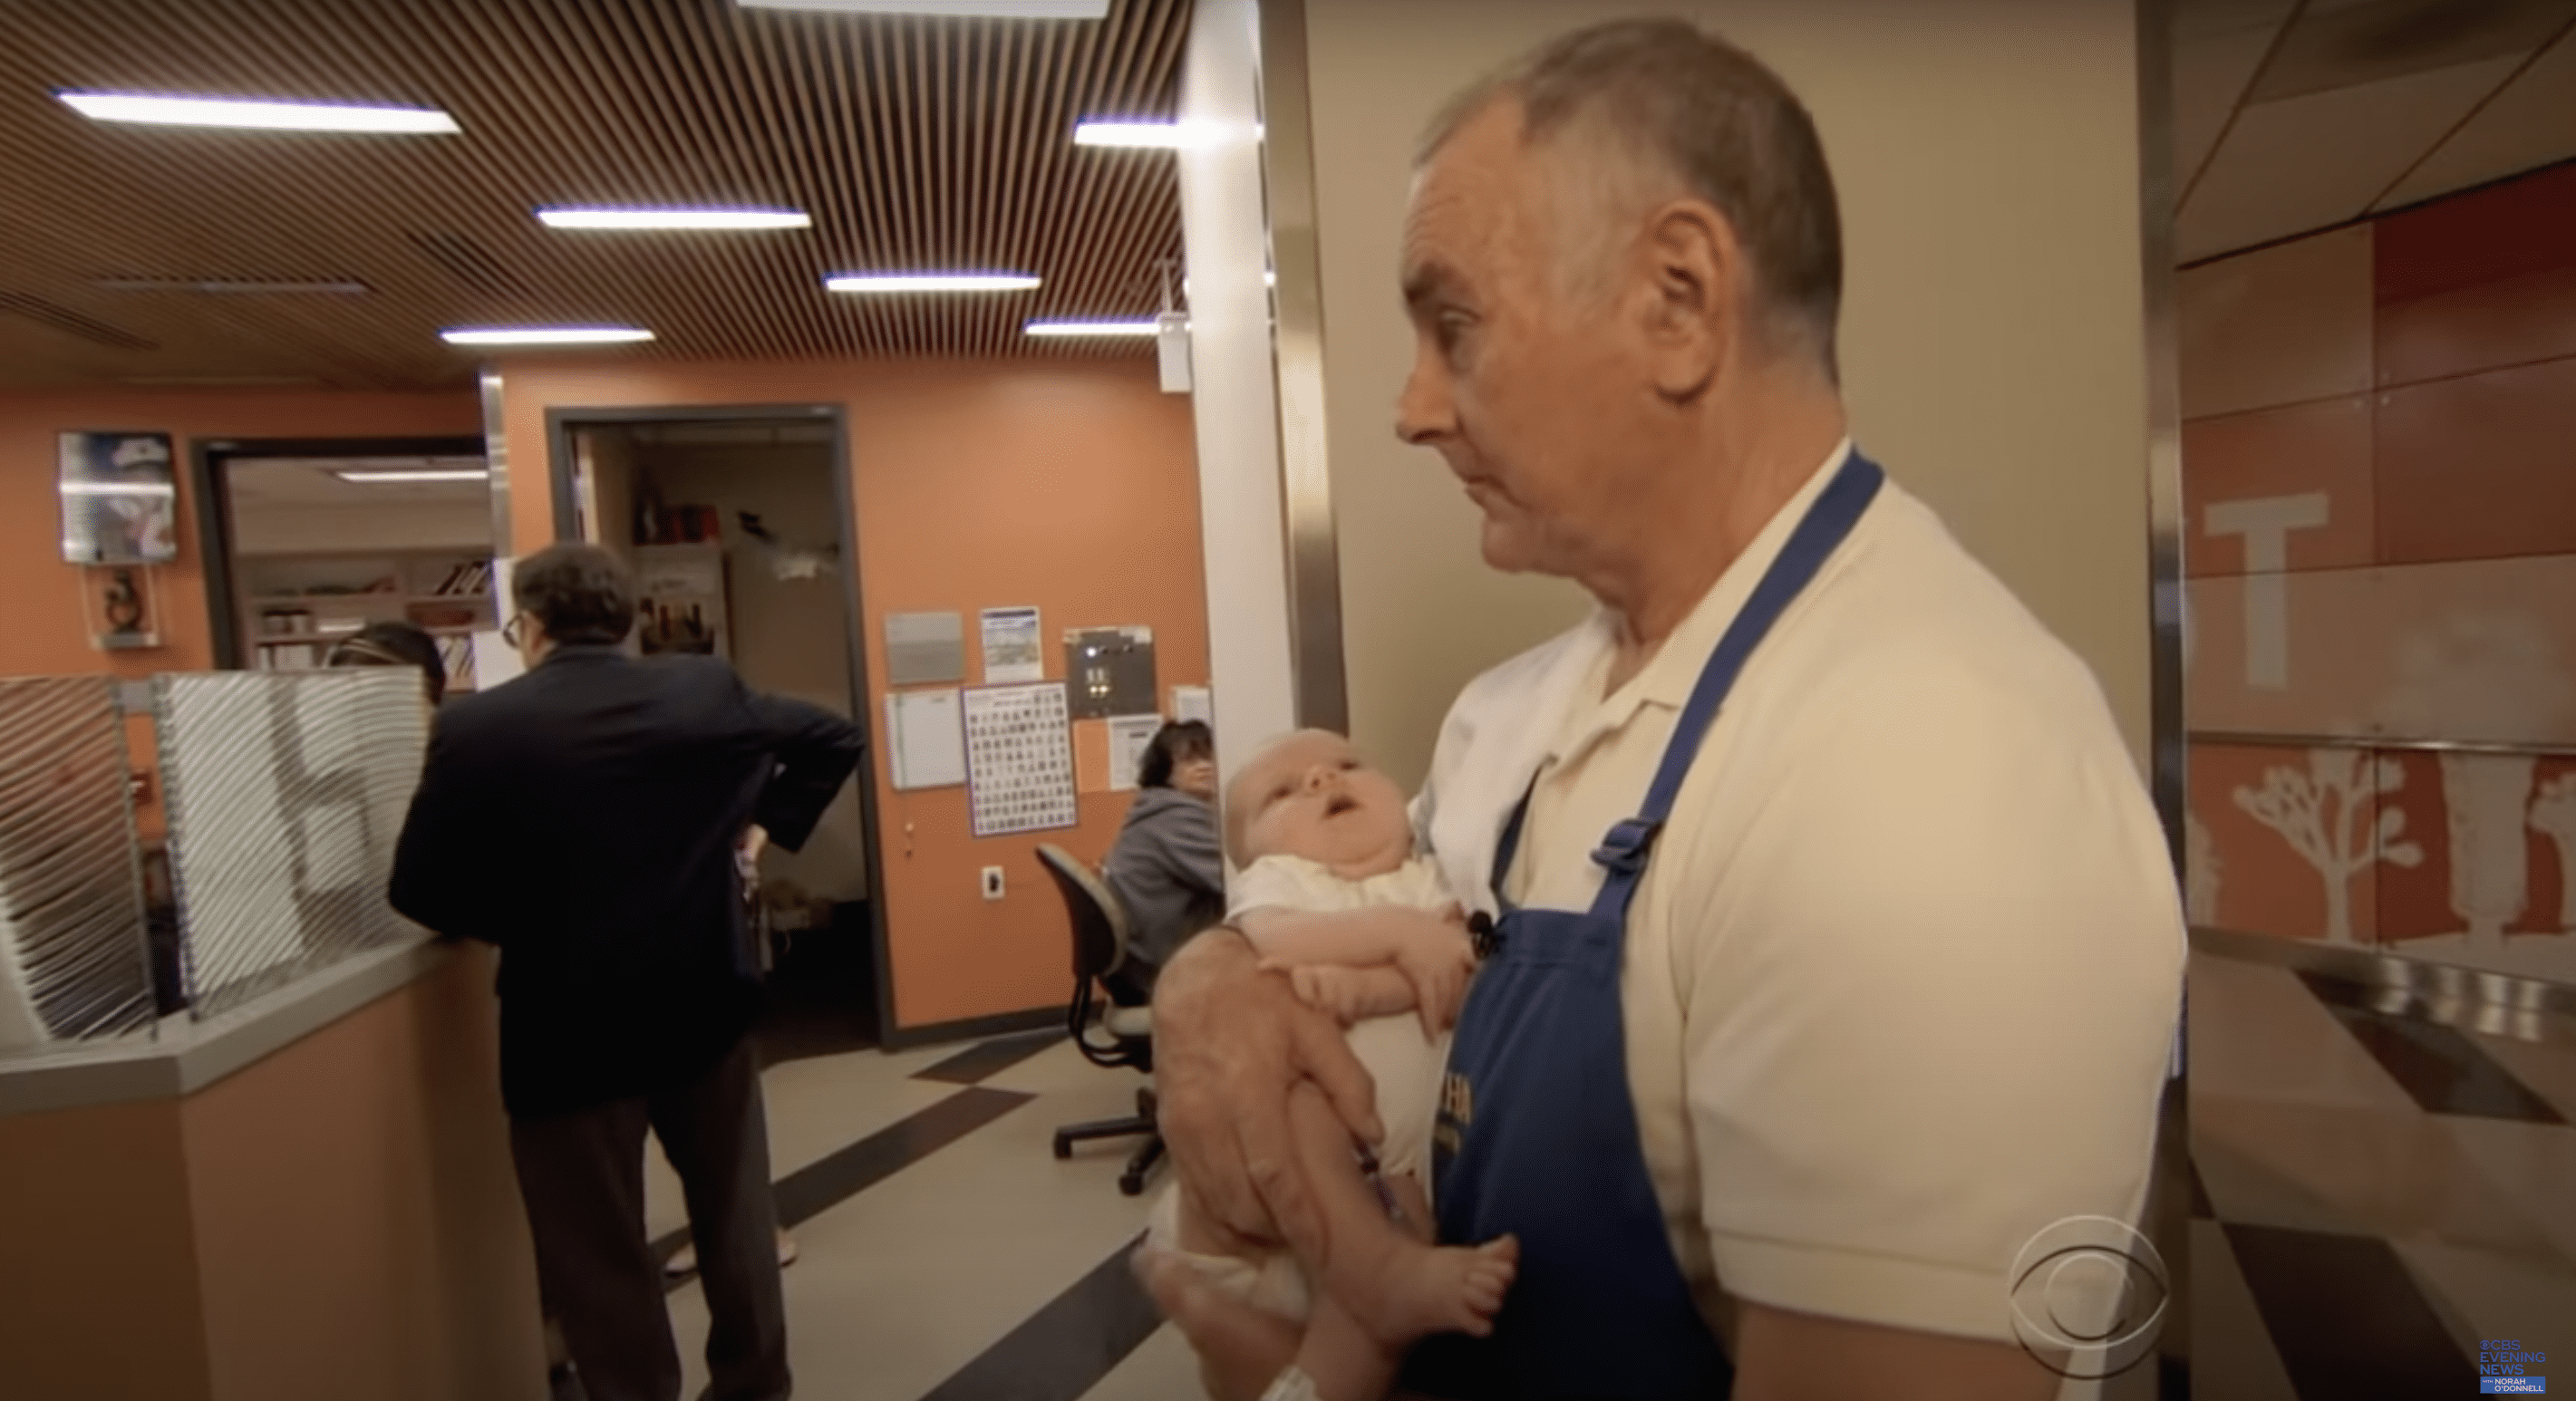 Jim O'Connor pictured cuddling a baby. | Source: youtube.com/CBS Evening News